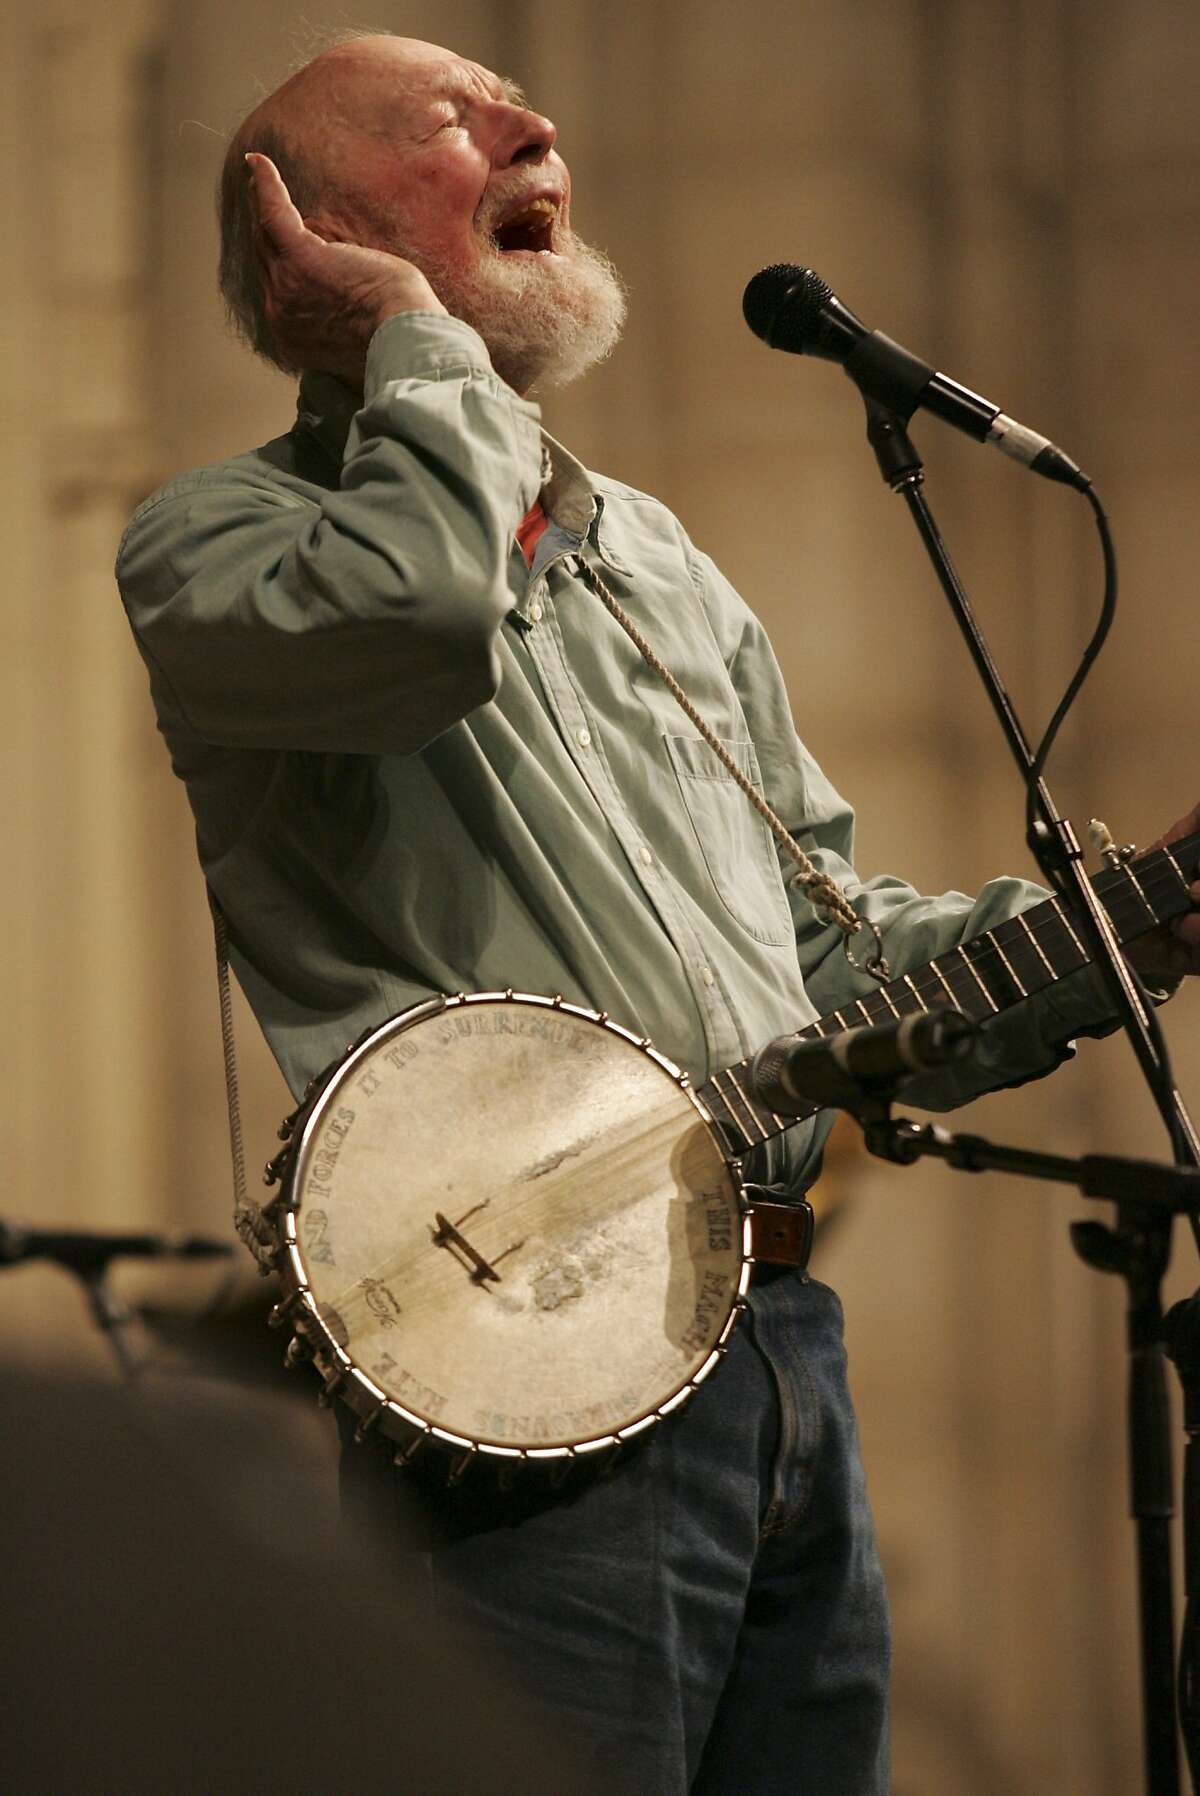 Pete Seeger's influence on Bay Area artists, activists